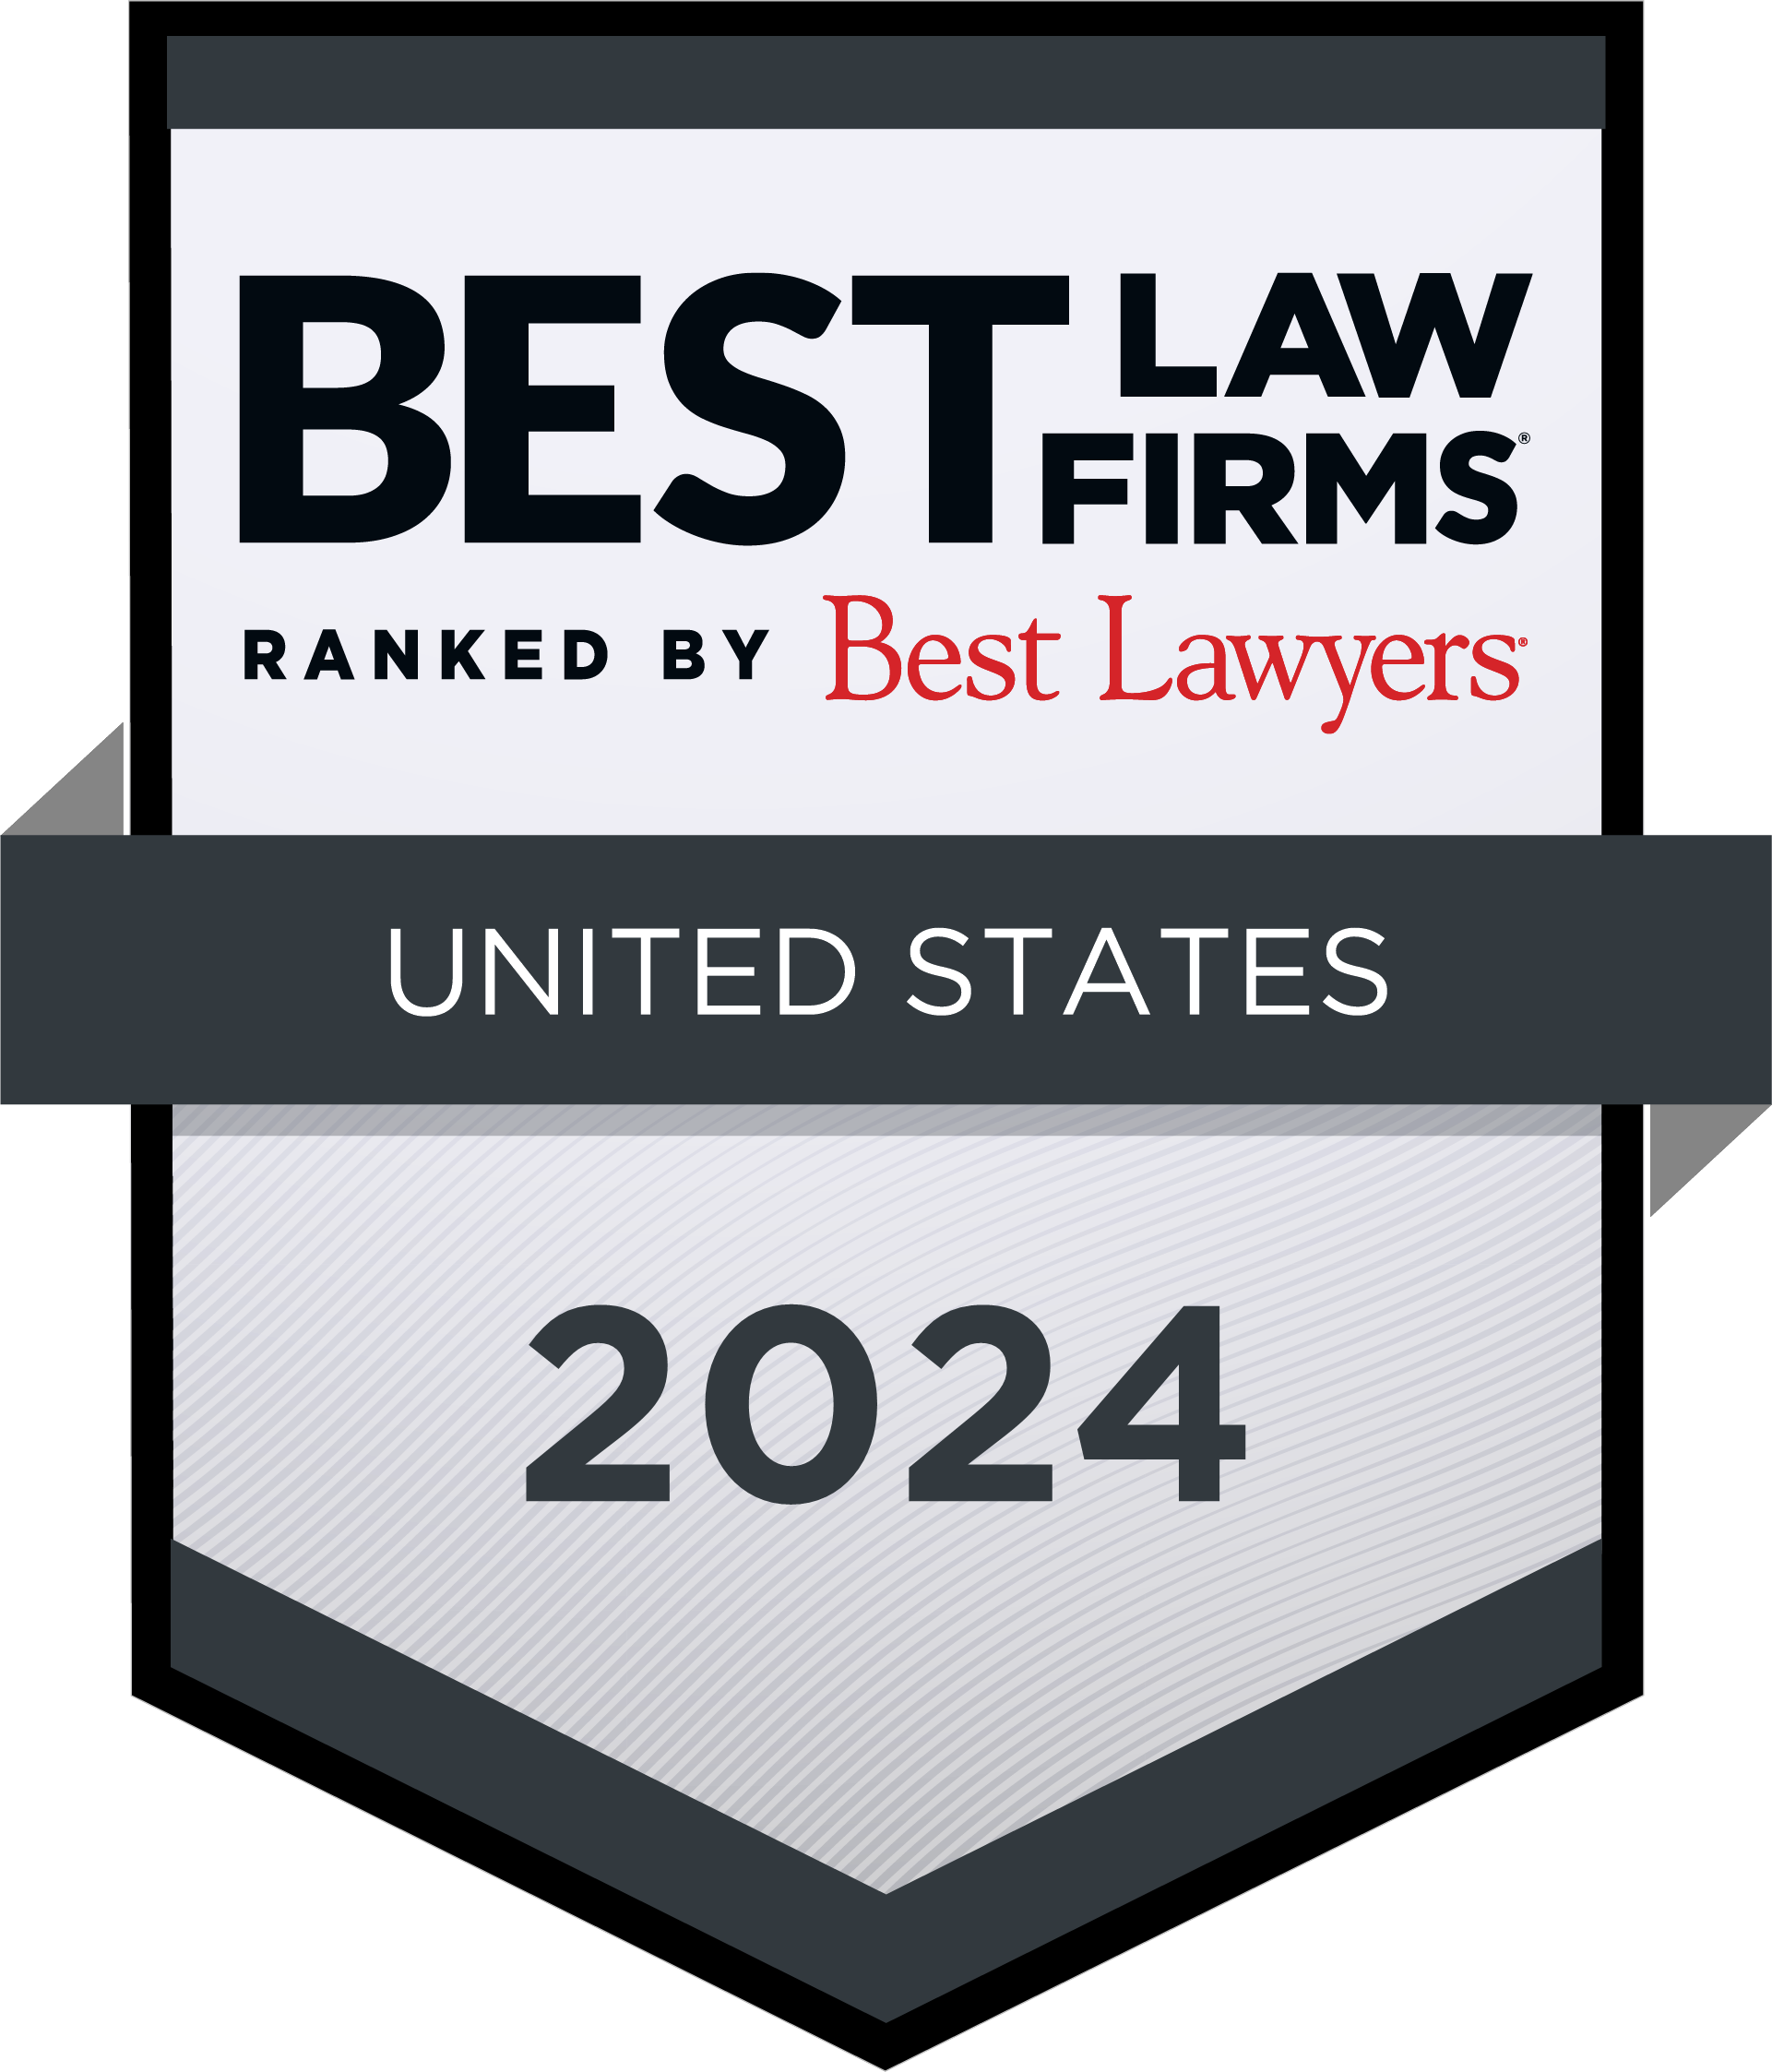 Best Law Firms 2024 Award Badge